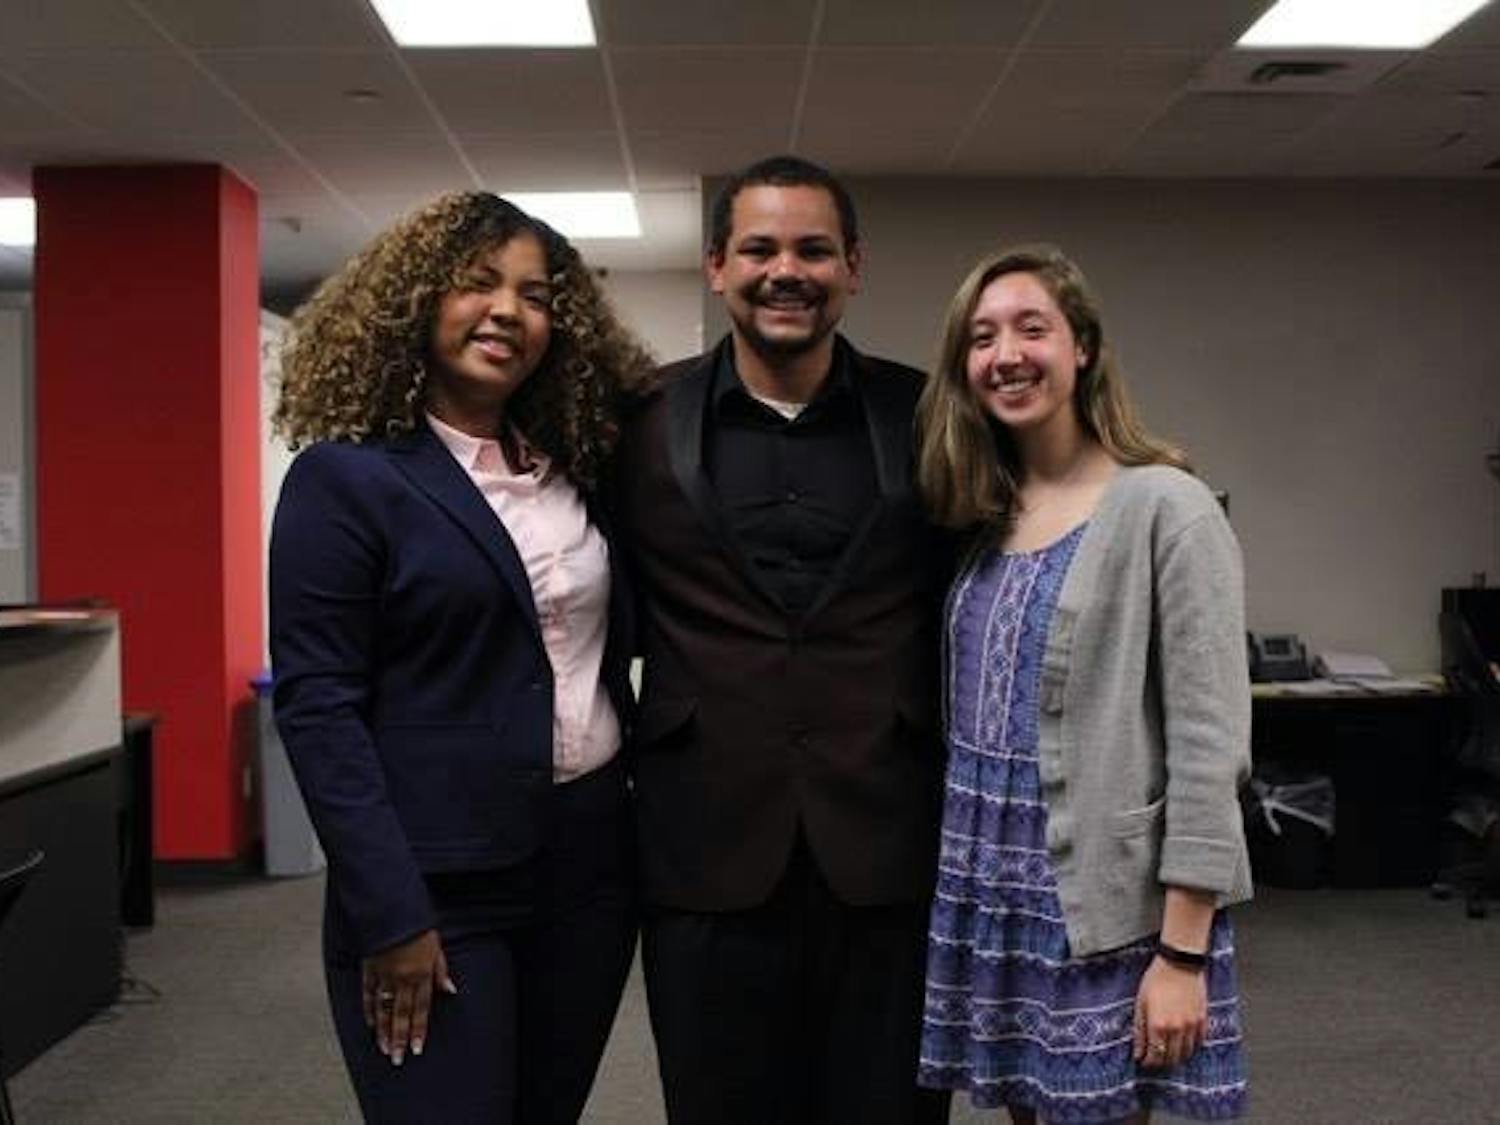 Leslie Veloz (left), Jamersin Redfern (middle) and Janet Austin (right) were elected president, vice president and treasurer for the 2017-18 SA executive board.